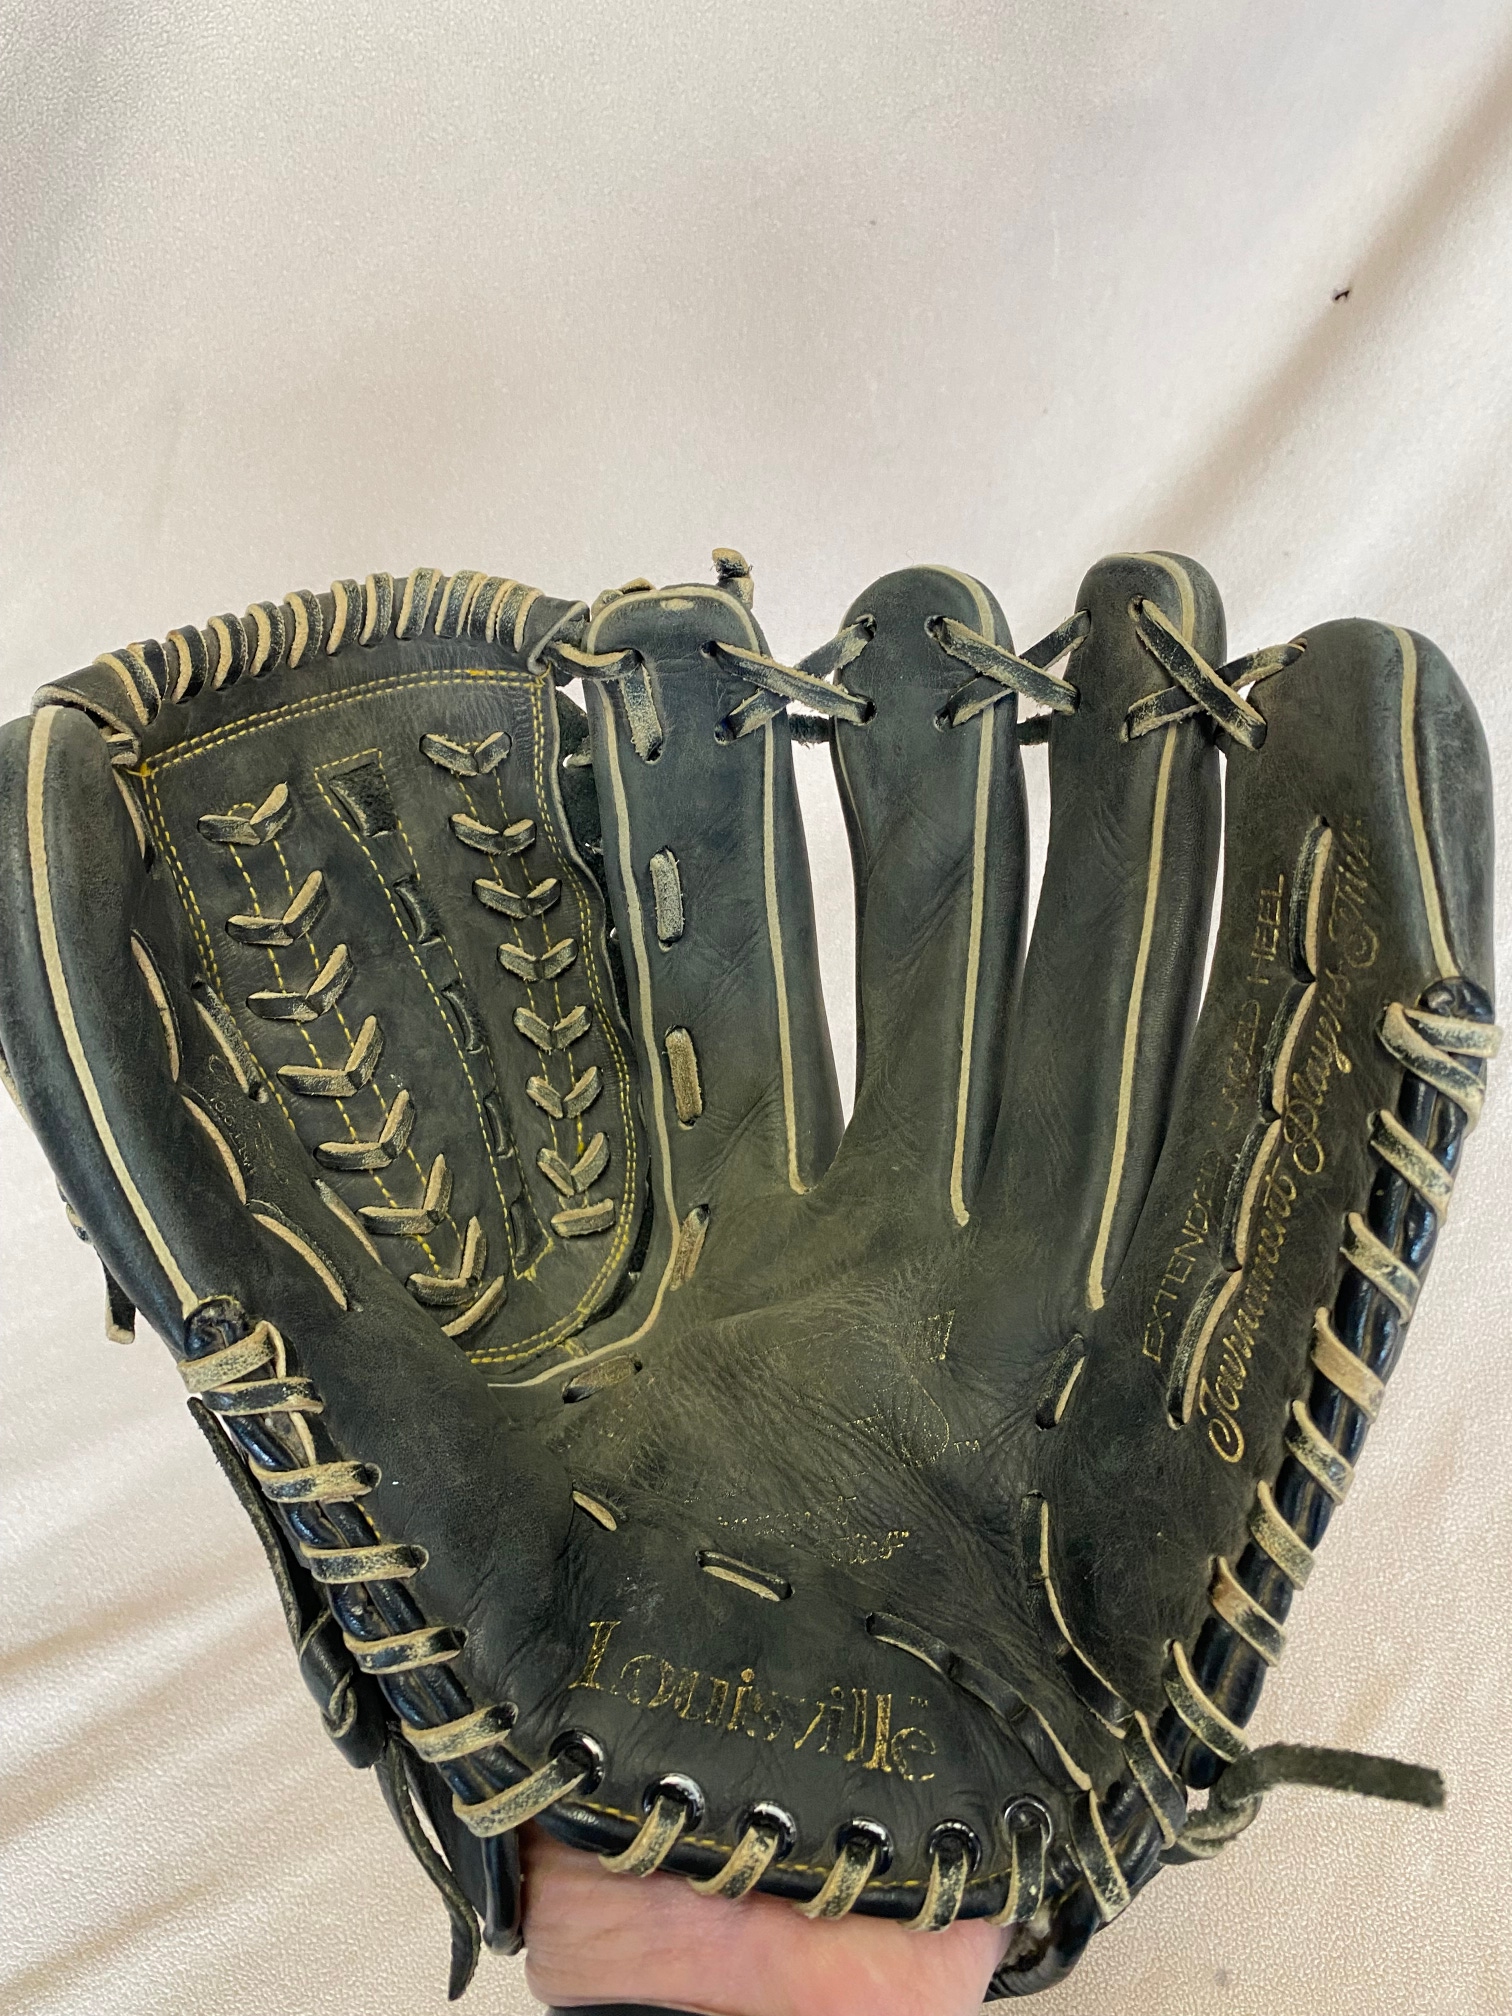 Used Right Hand Throw Louisville Slugger Outfield Hsb Softball Glove